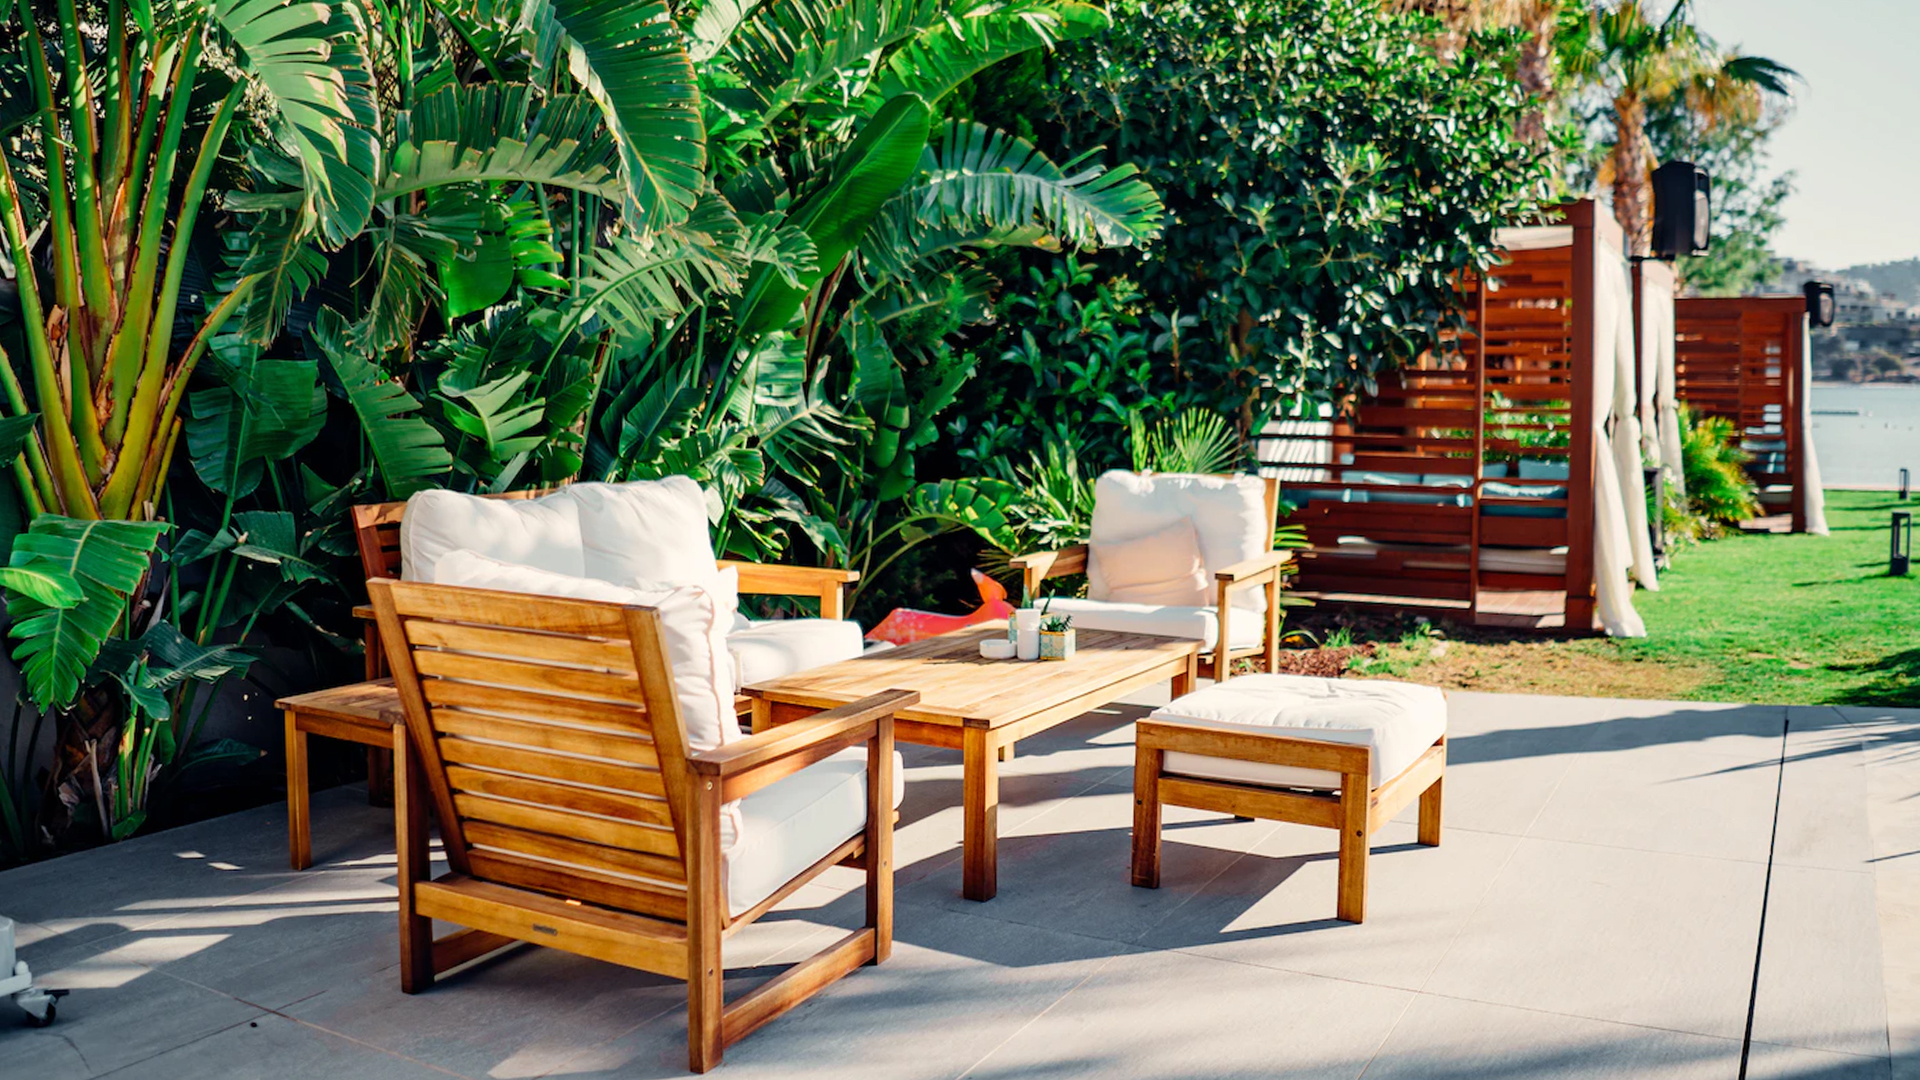 Our quick tips to transform your summer patio